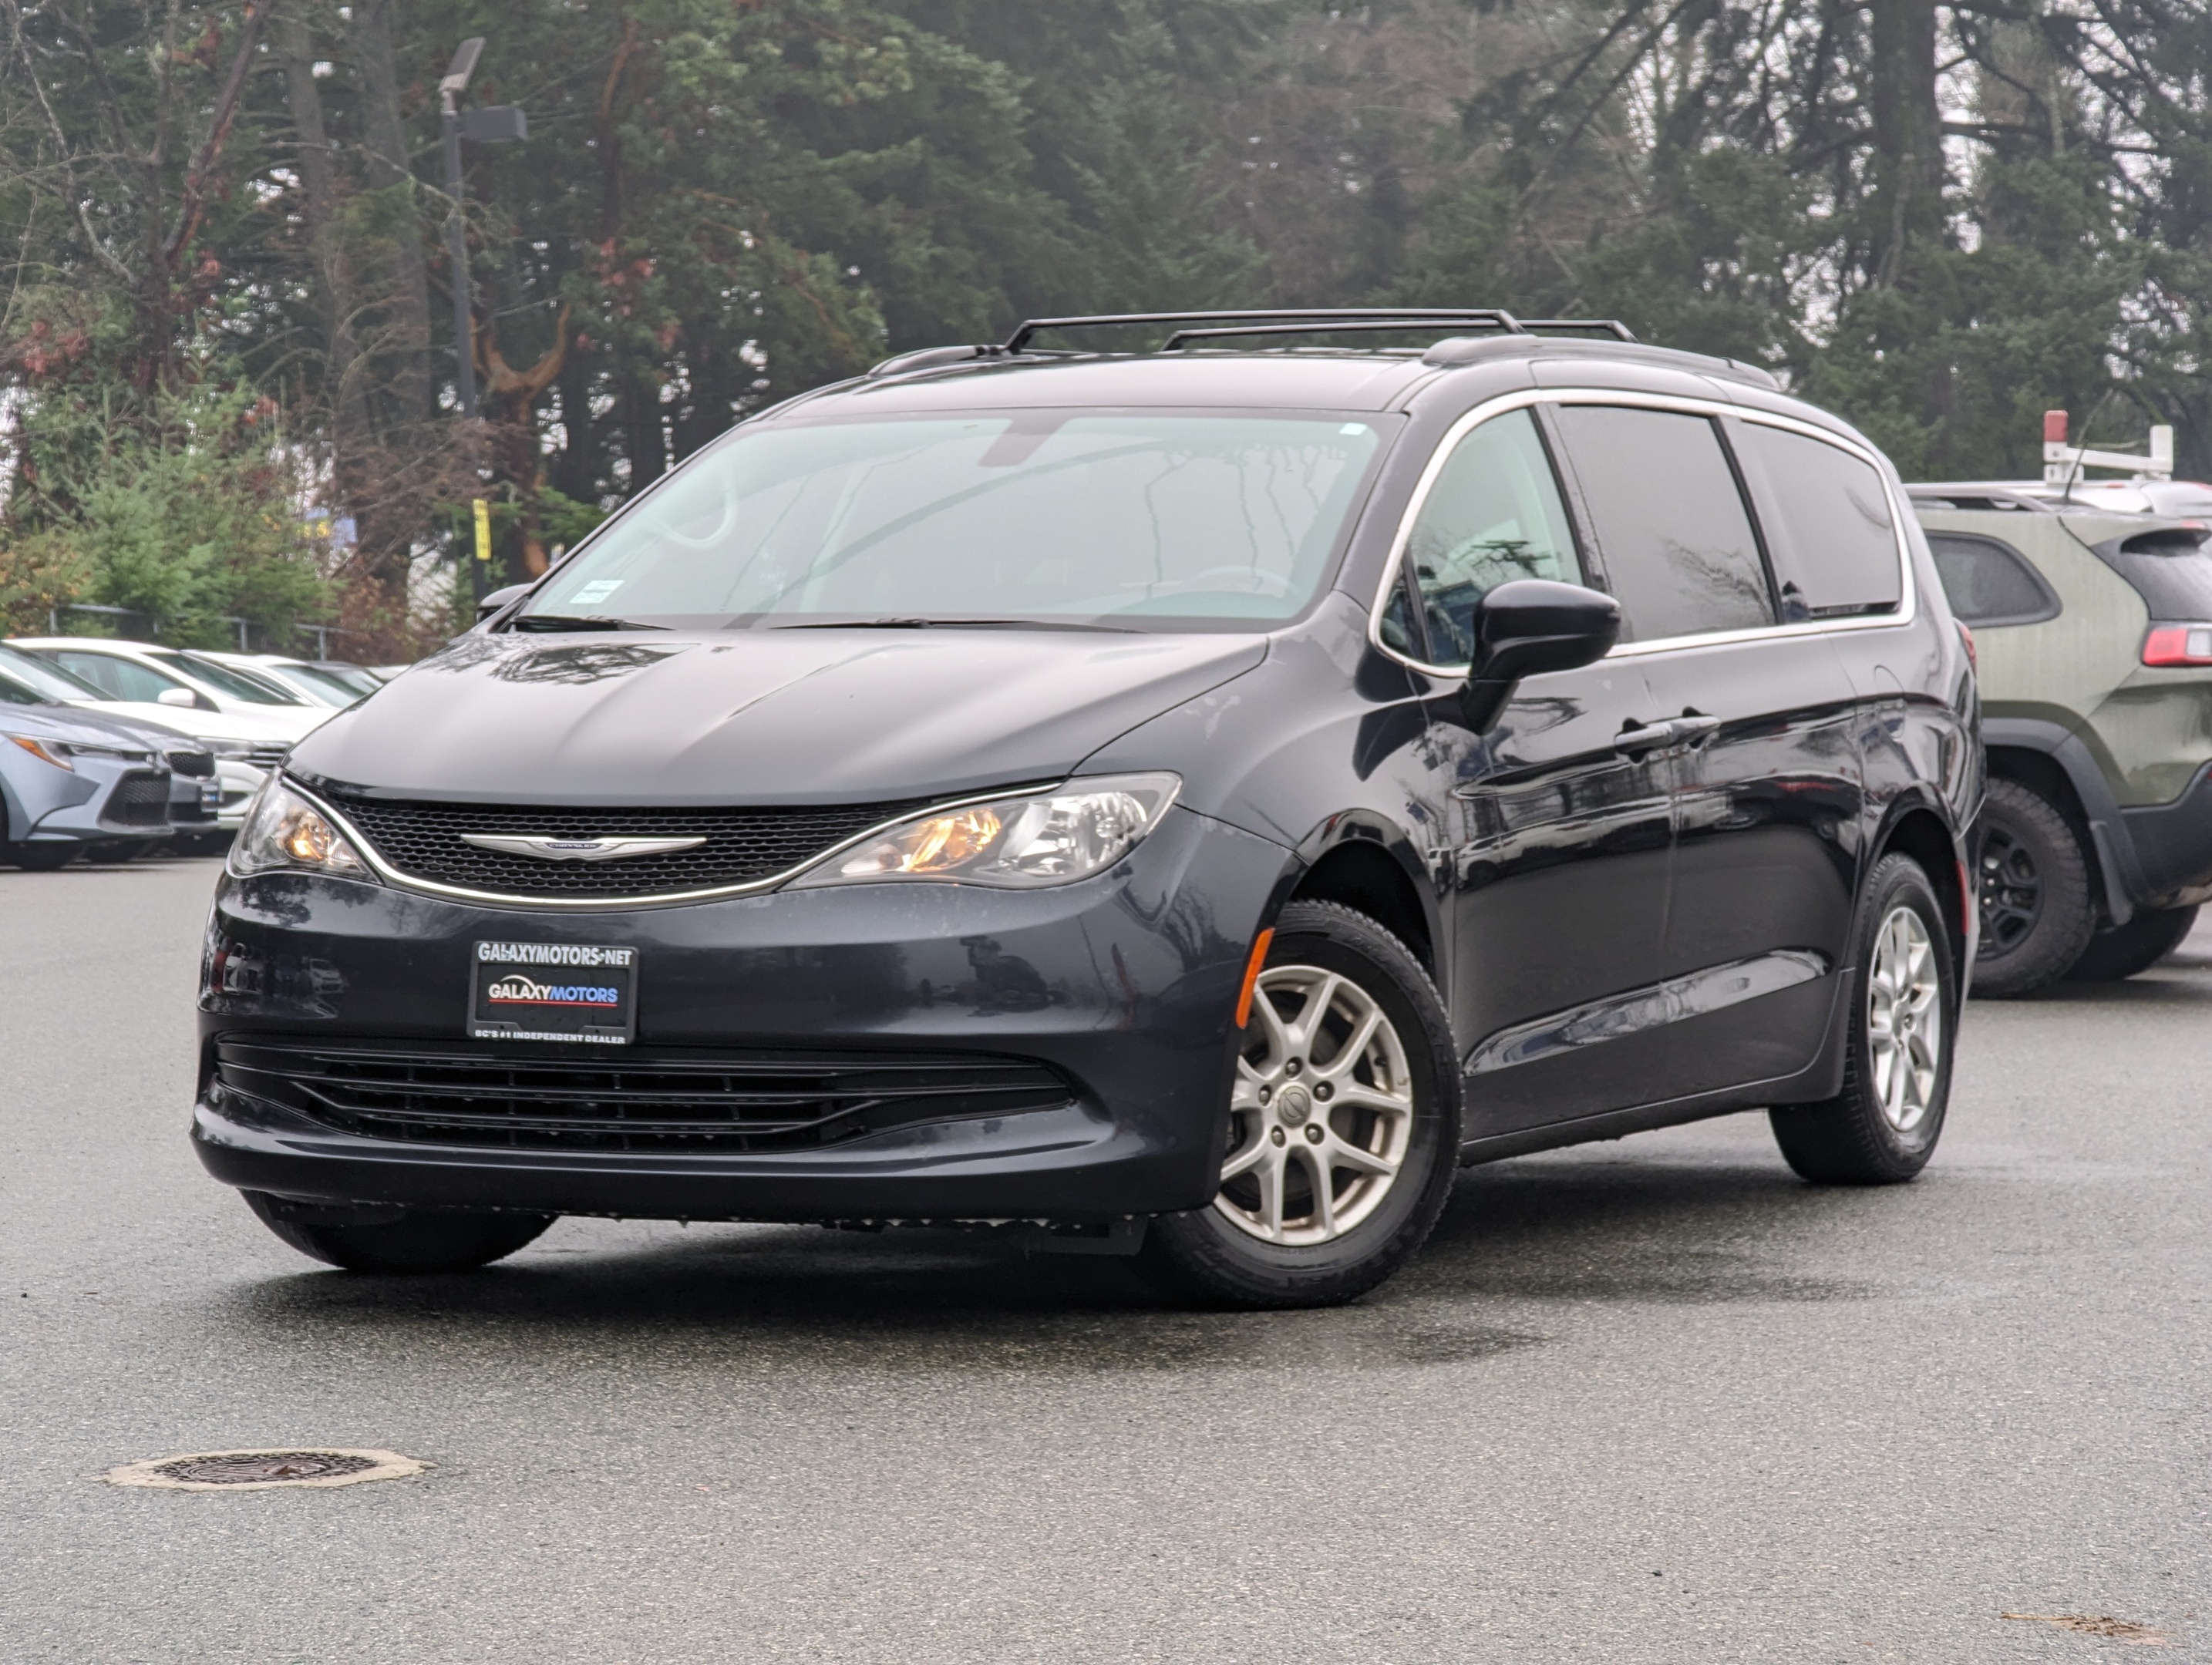 2019 Chrysler Pacifica Touring - No Accidents, 7 Passenger, PWR Doors